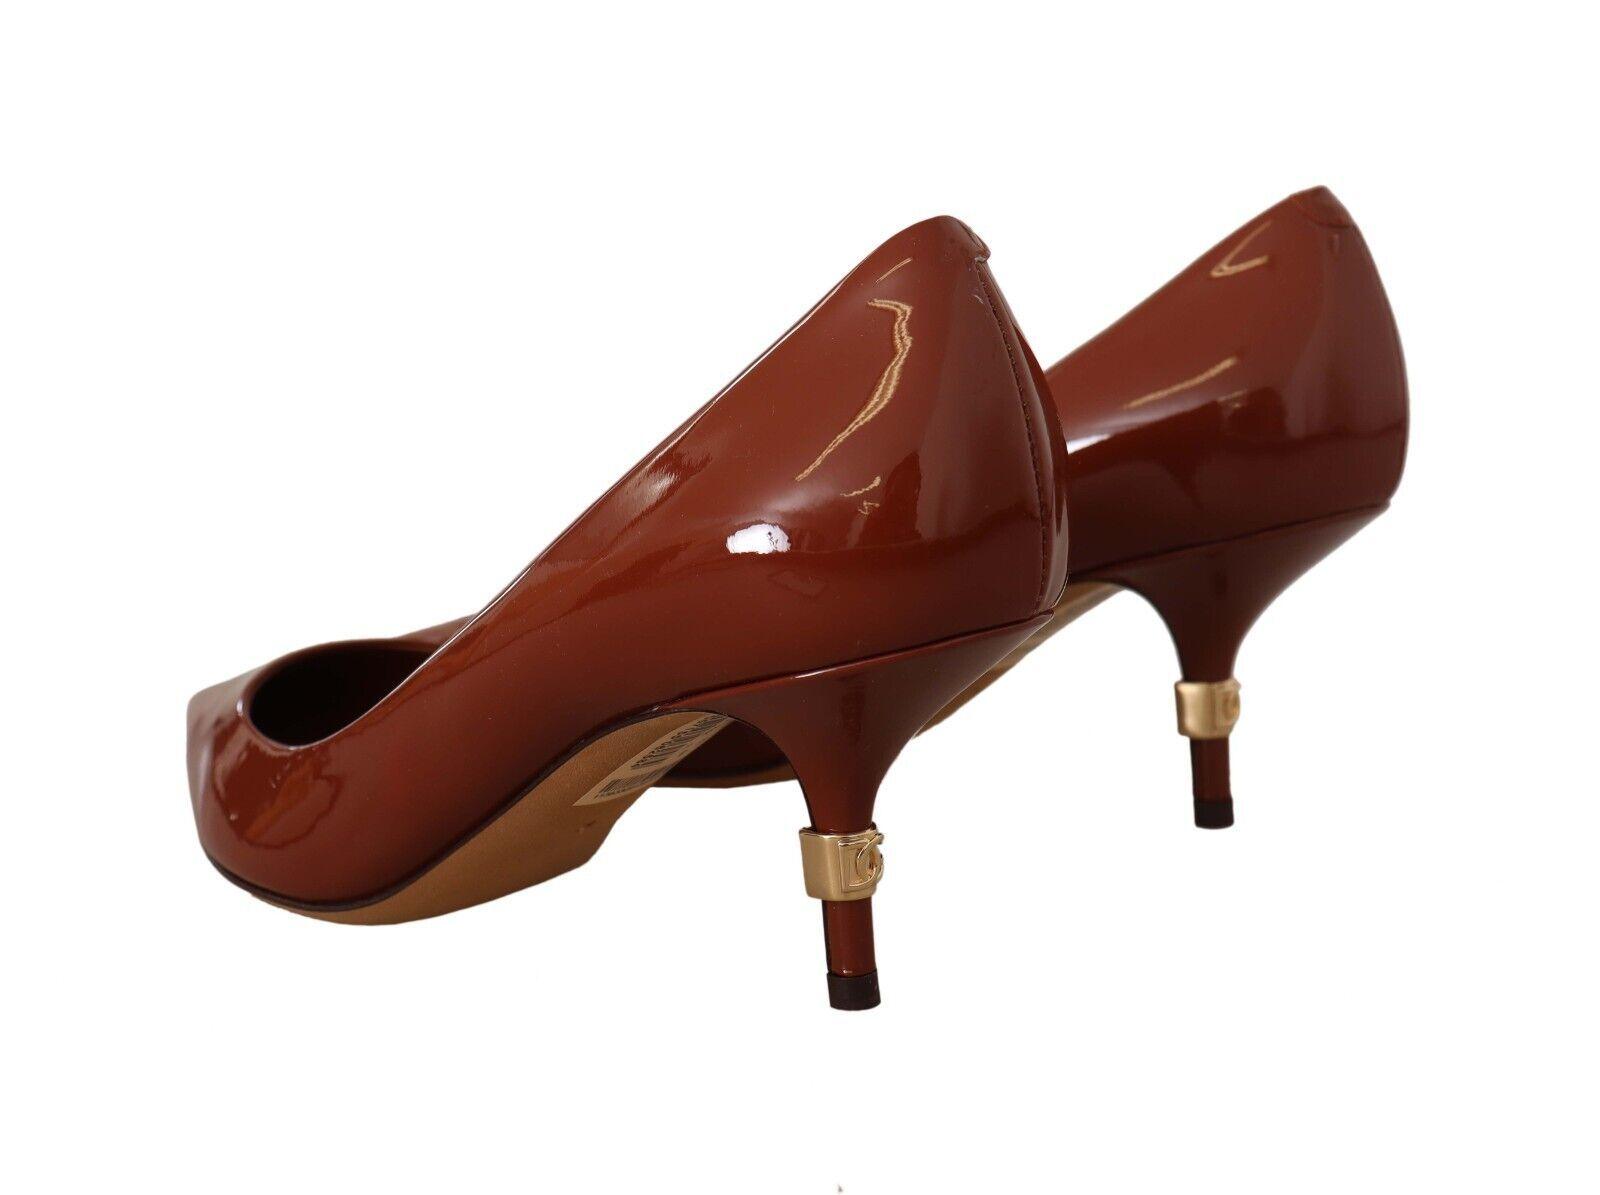 Dolce & Gabbana Brown Kitten Heels Pumps Patent Leather Shoes - Designed by Dolce & Gabbana Available to Buy at a Discounted Price on Moon Behind The Hill Online Designer Discount Store